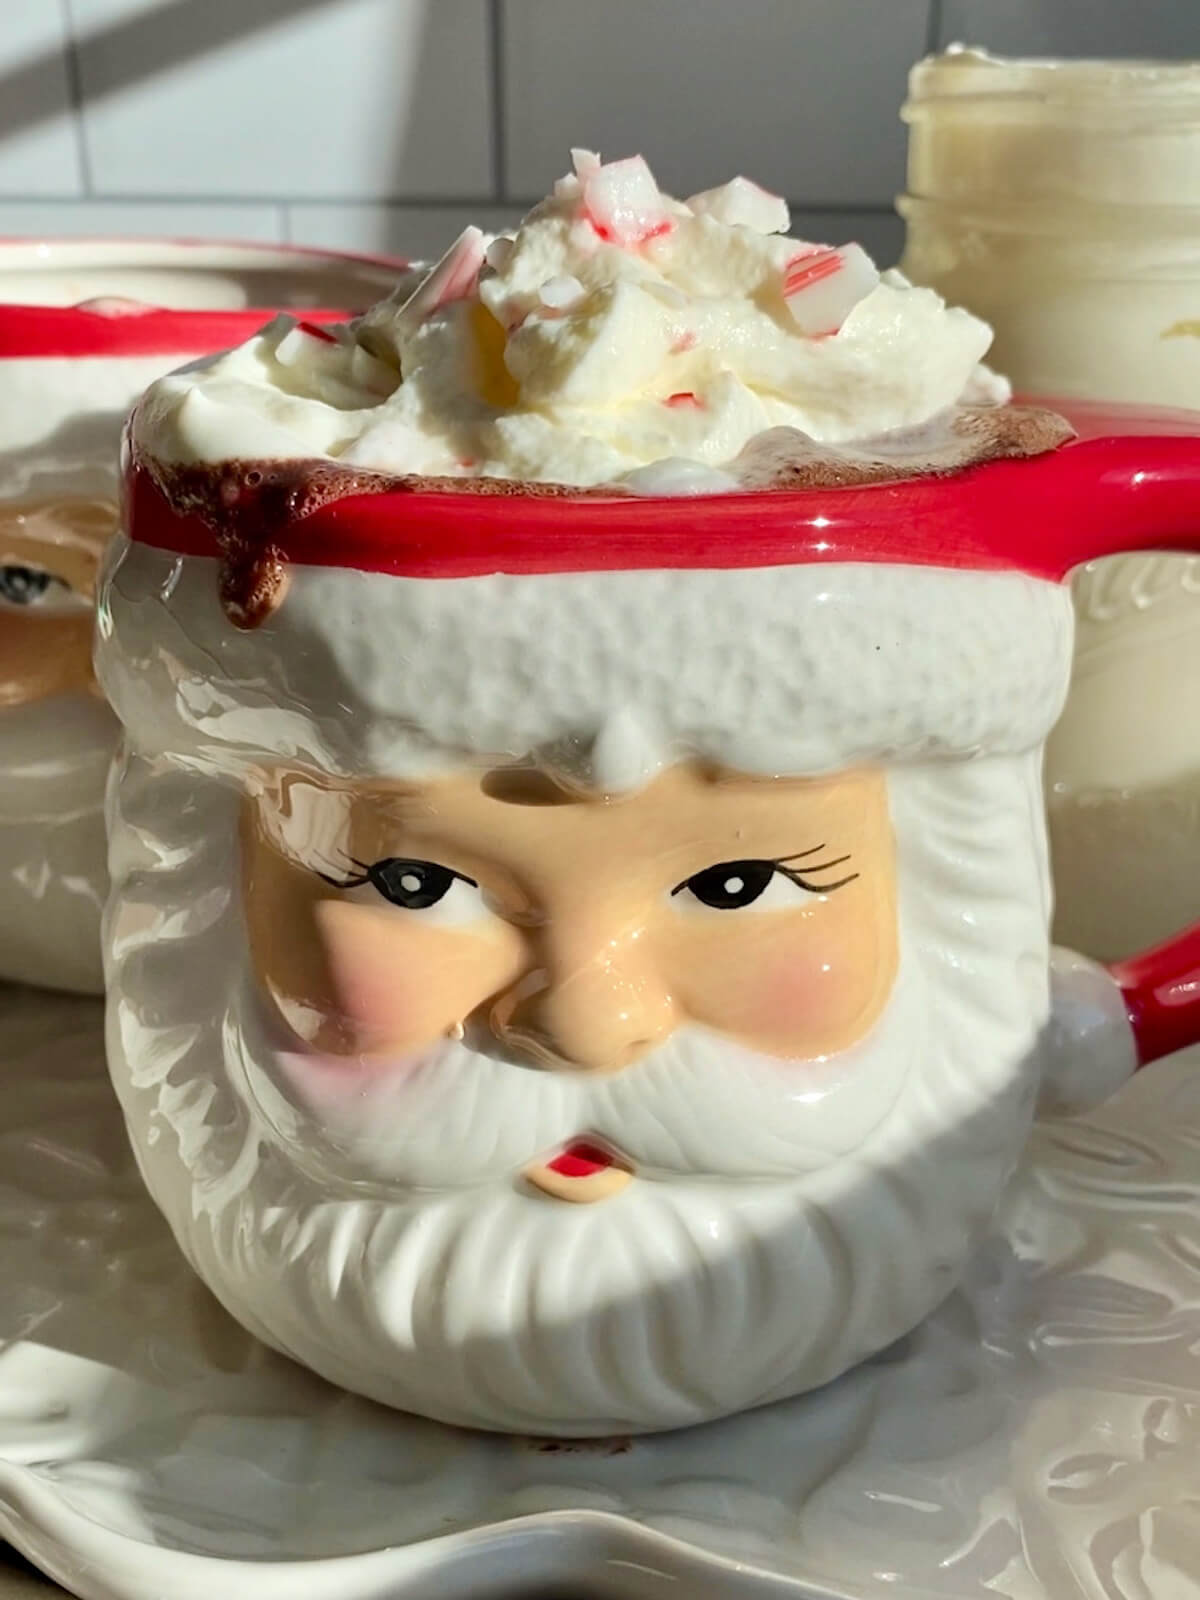 A Santa mug brimming with homemade peppermint hot chocolate. The hot chocolate is topped with homemade whipped cream and crushed candy cane pieces.